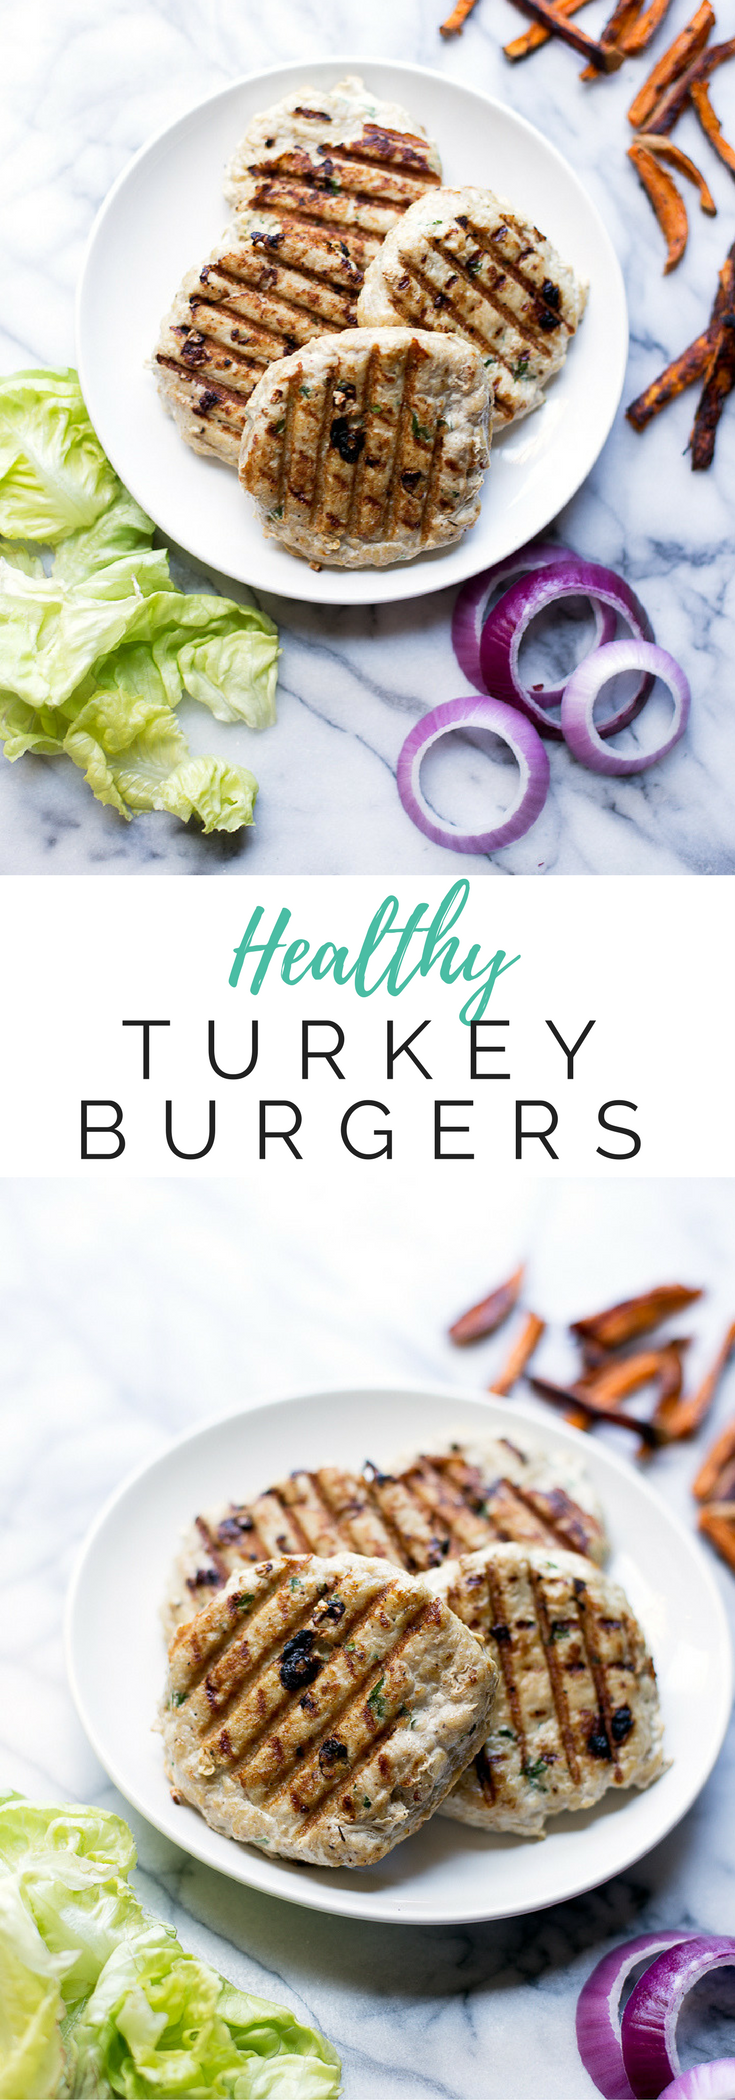 These healthy turkey burgers are the perfect protein for your meal prep! They are flavorful, easy to make and are a total crowd-pleaser.